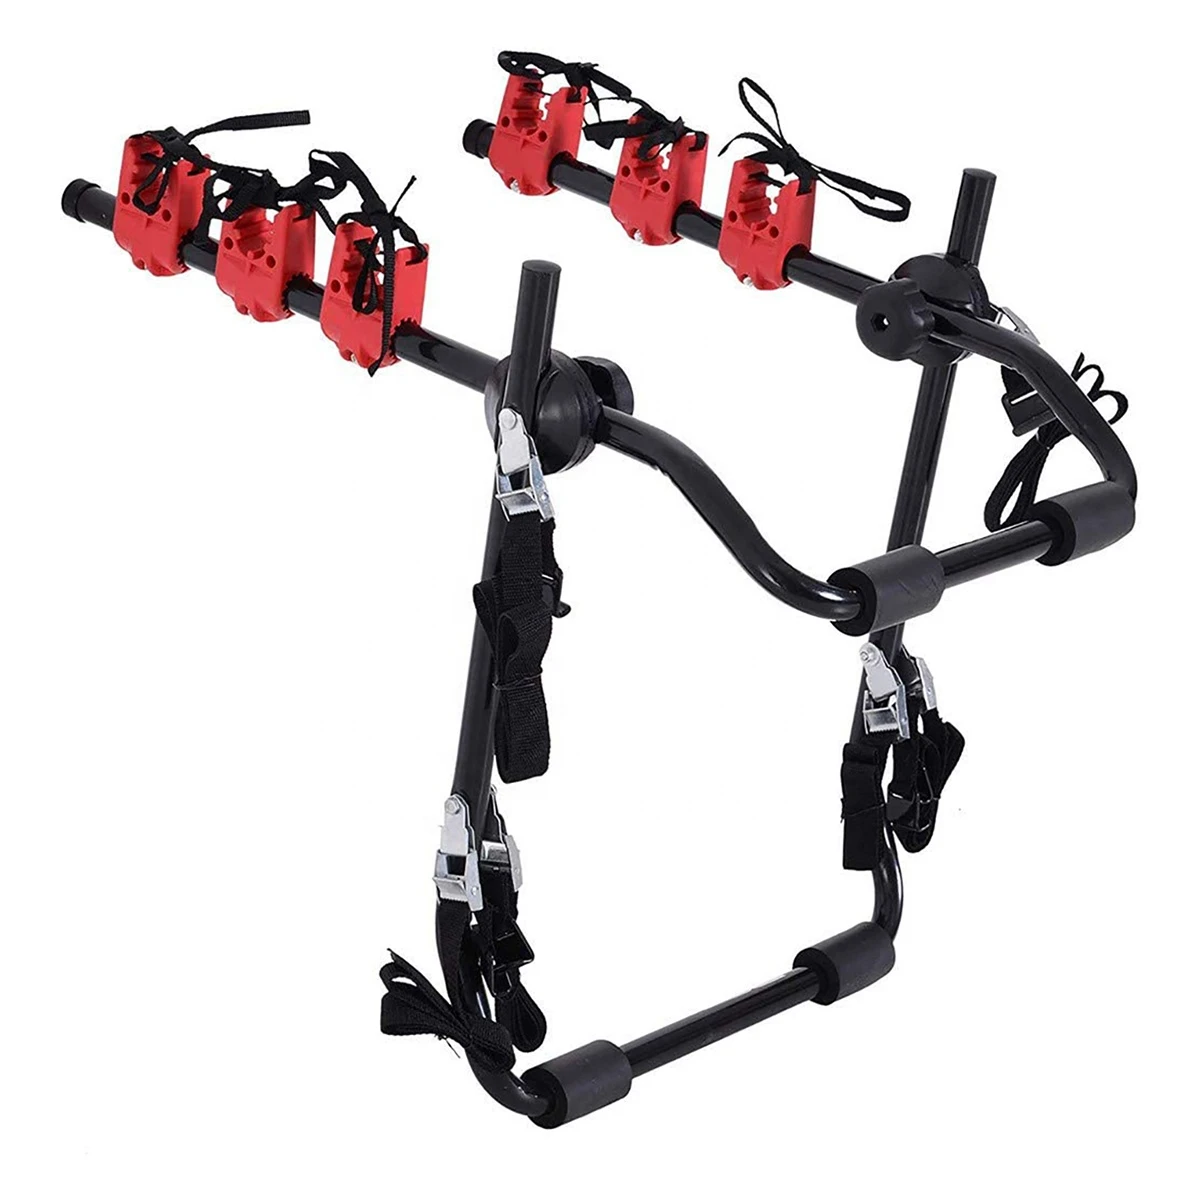 3-Bike Trunk Mount Racks Cycling Bicycle Stand Quick Installation Rack Storage Carrier Car Racks